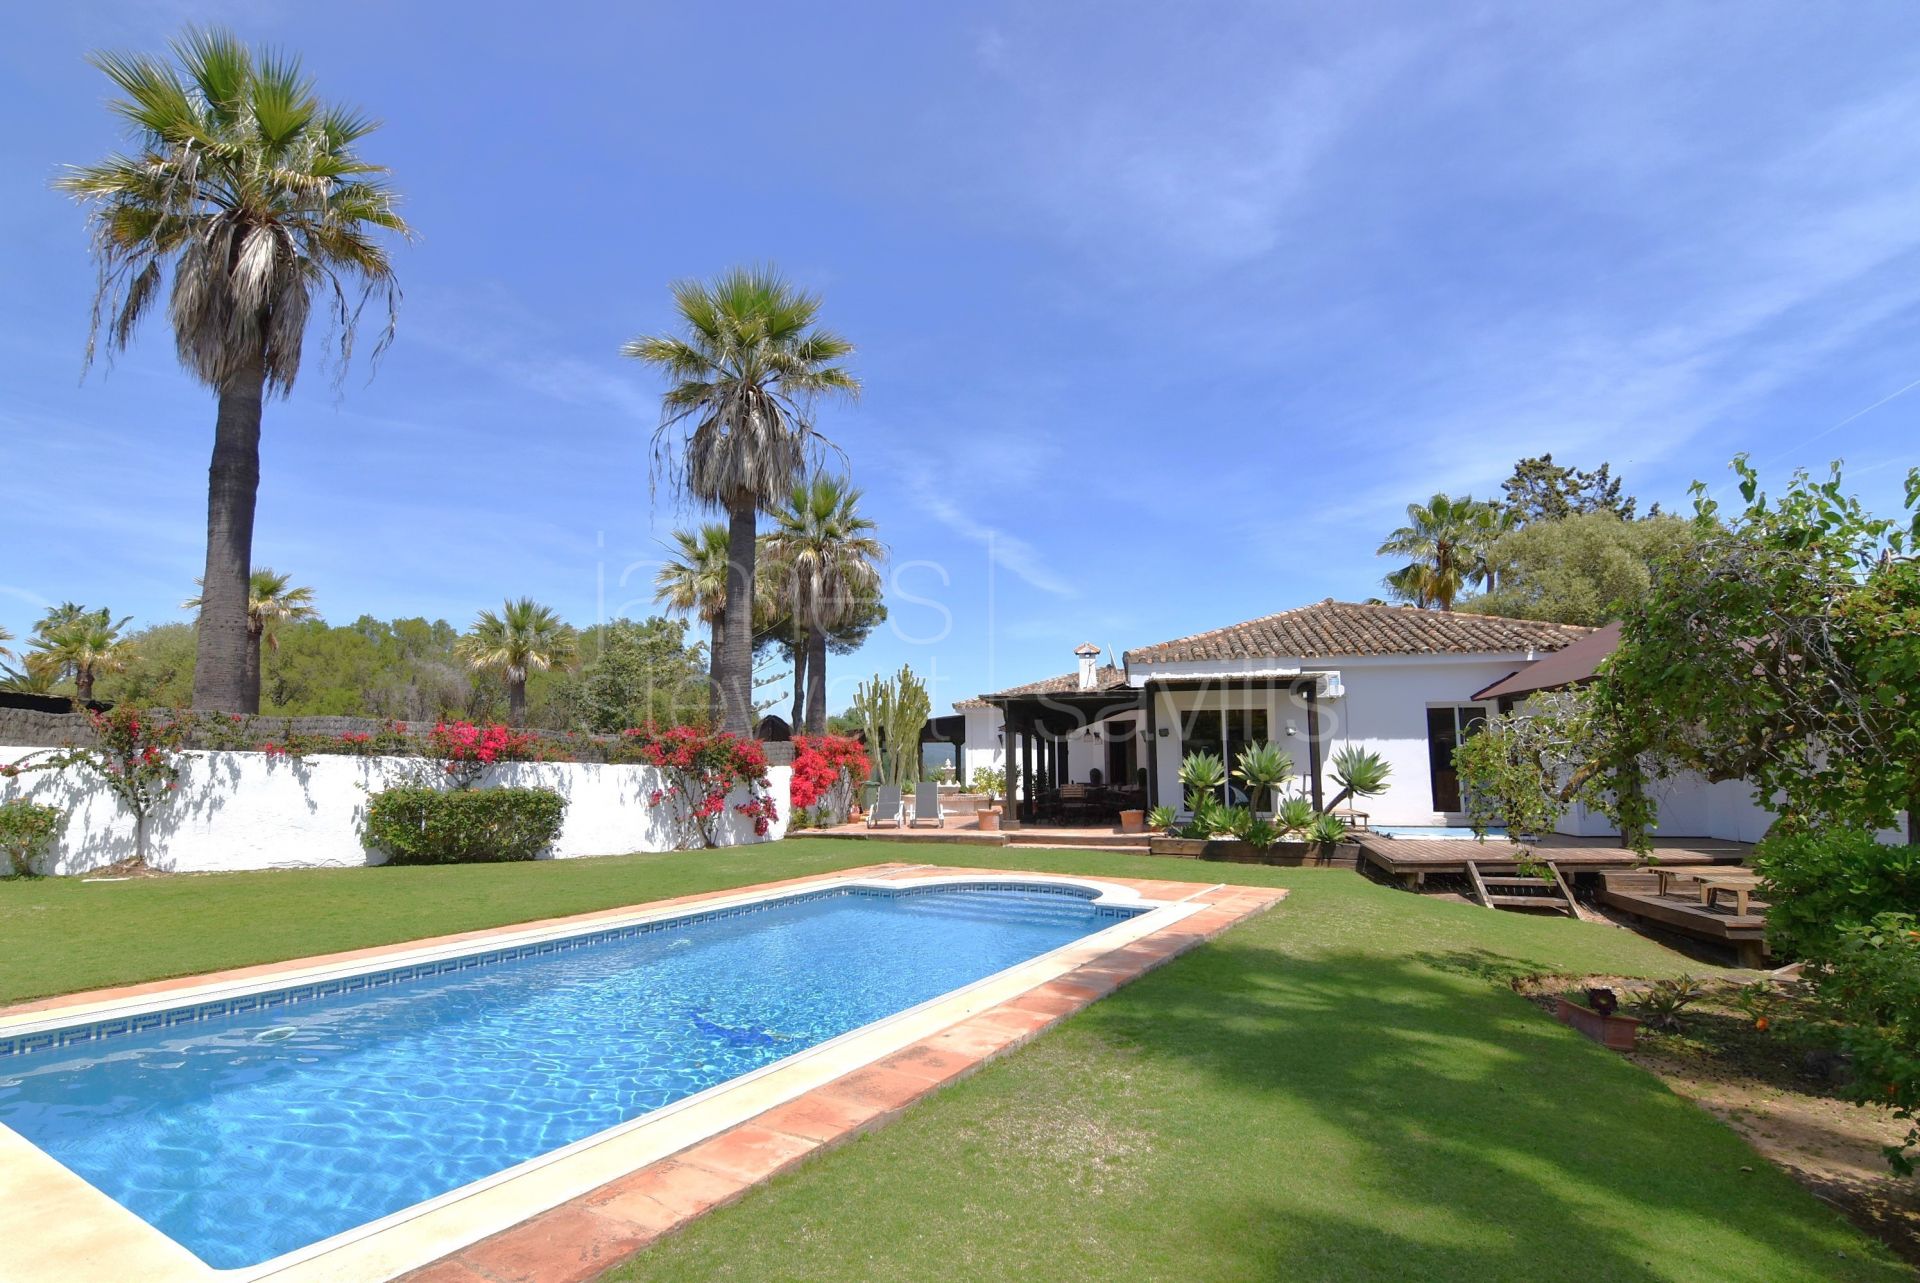 Characterful villa on originally 4 plots with lovely country views and guest house